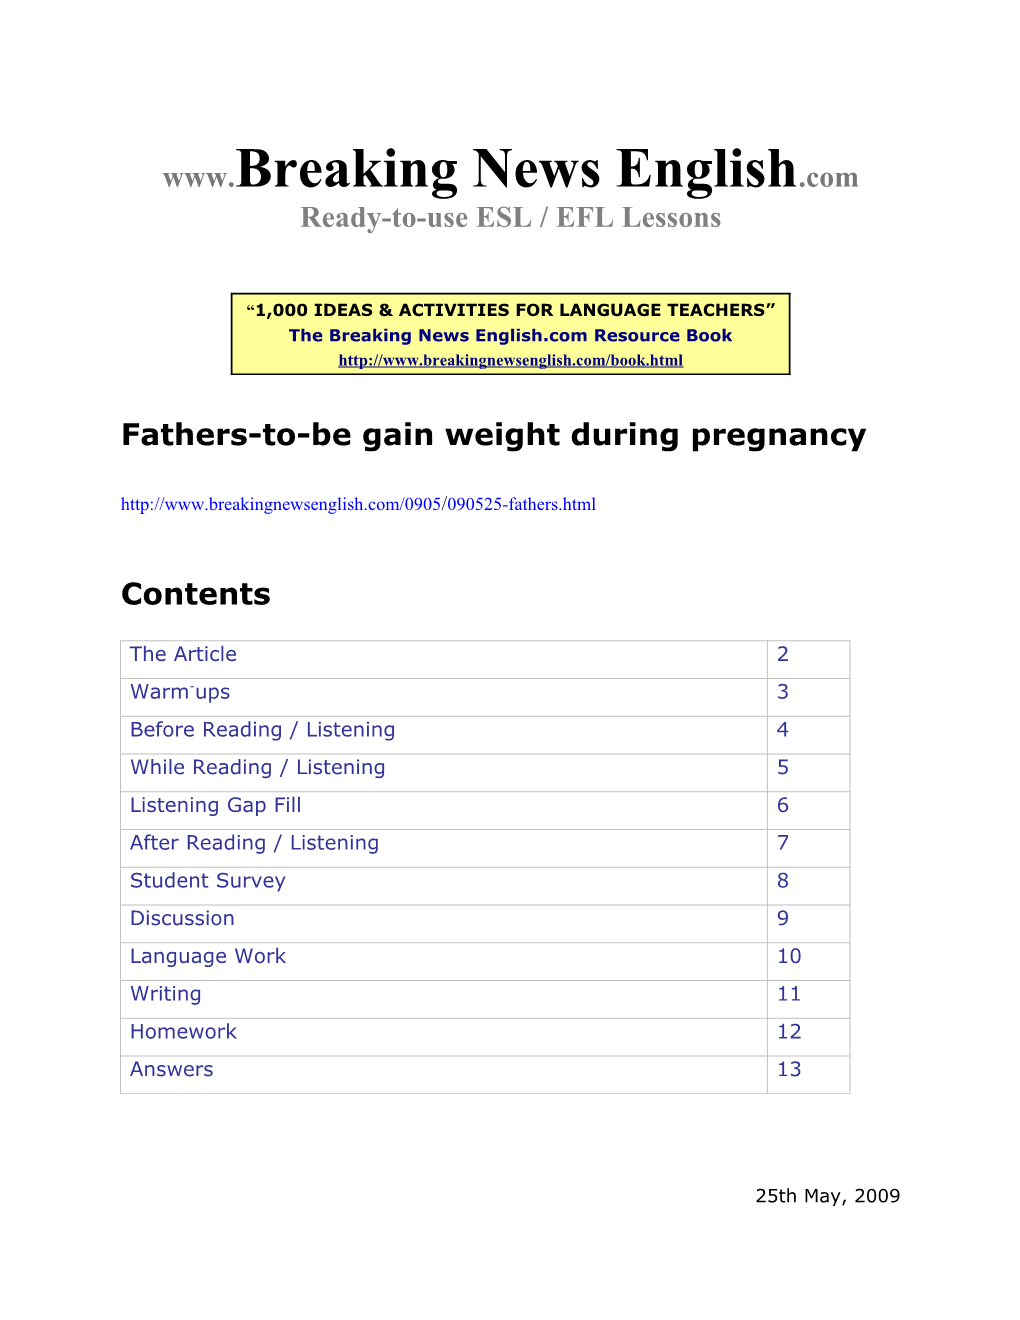 ESL Lesson: Fathers-To-Be Gain Weight During Pregnancy